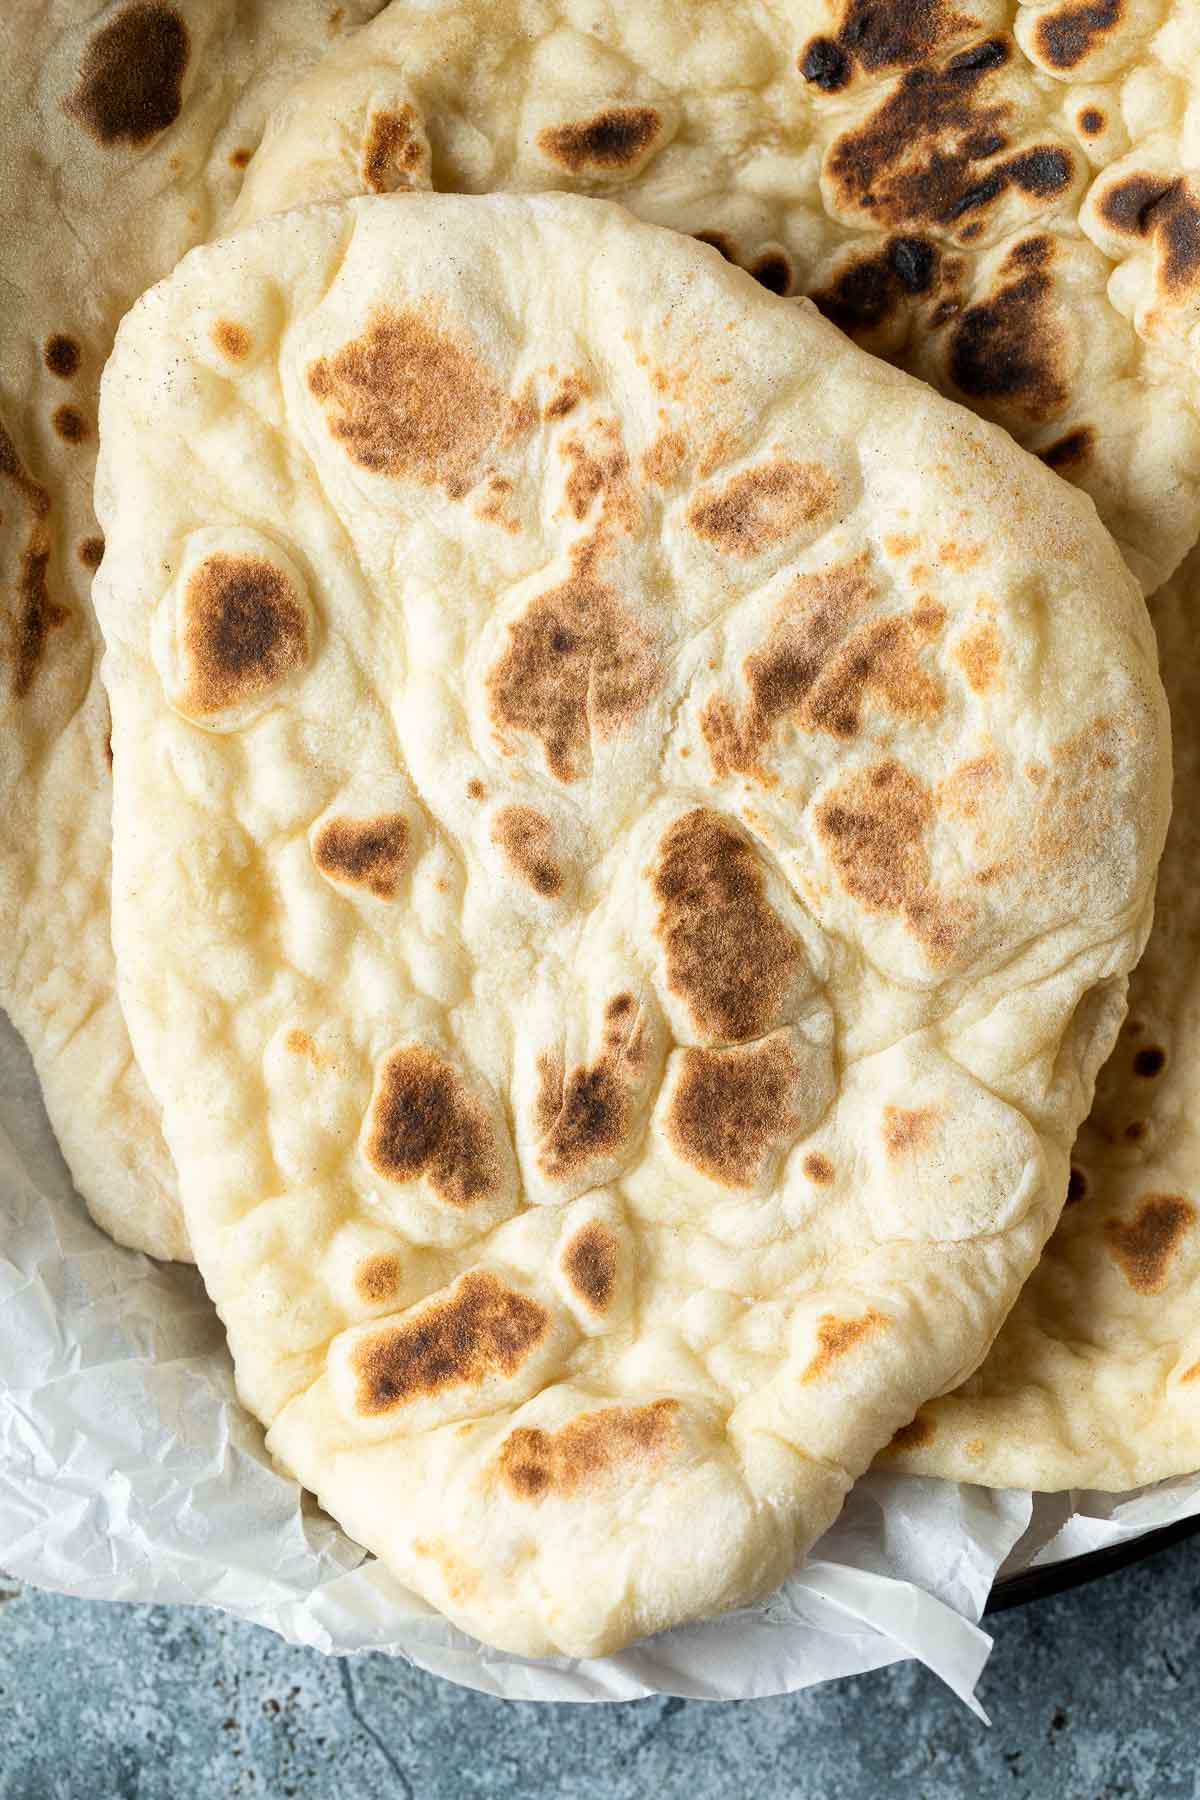 A stack of naan on a plate.